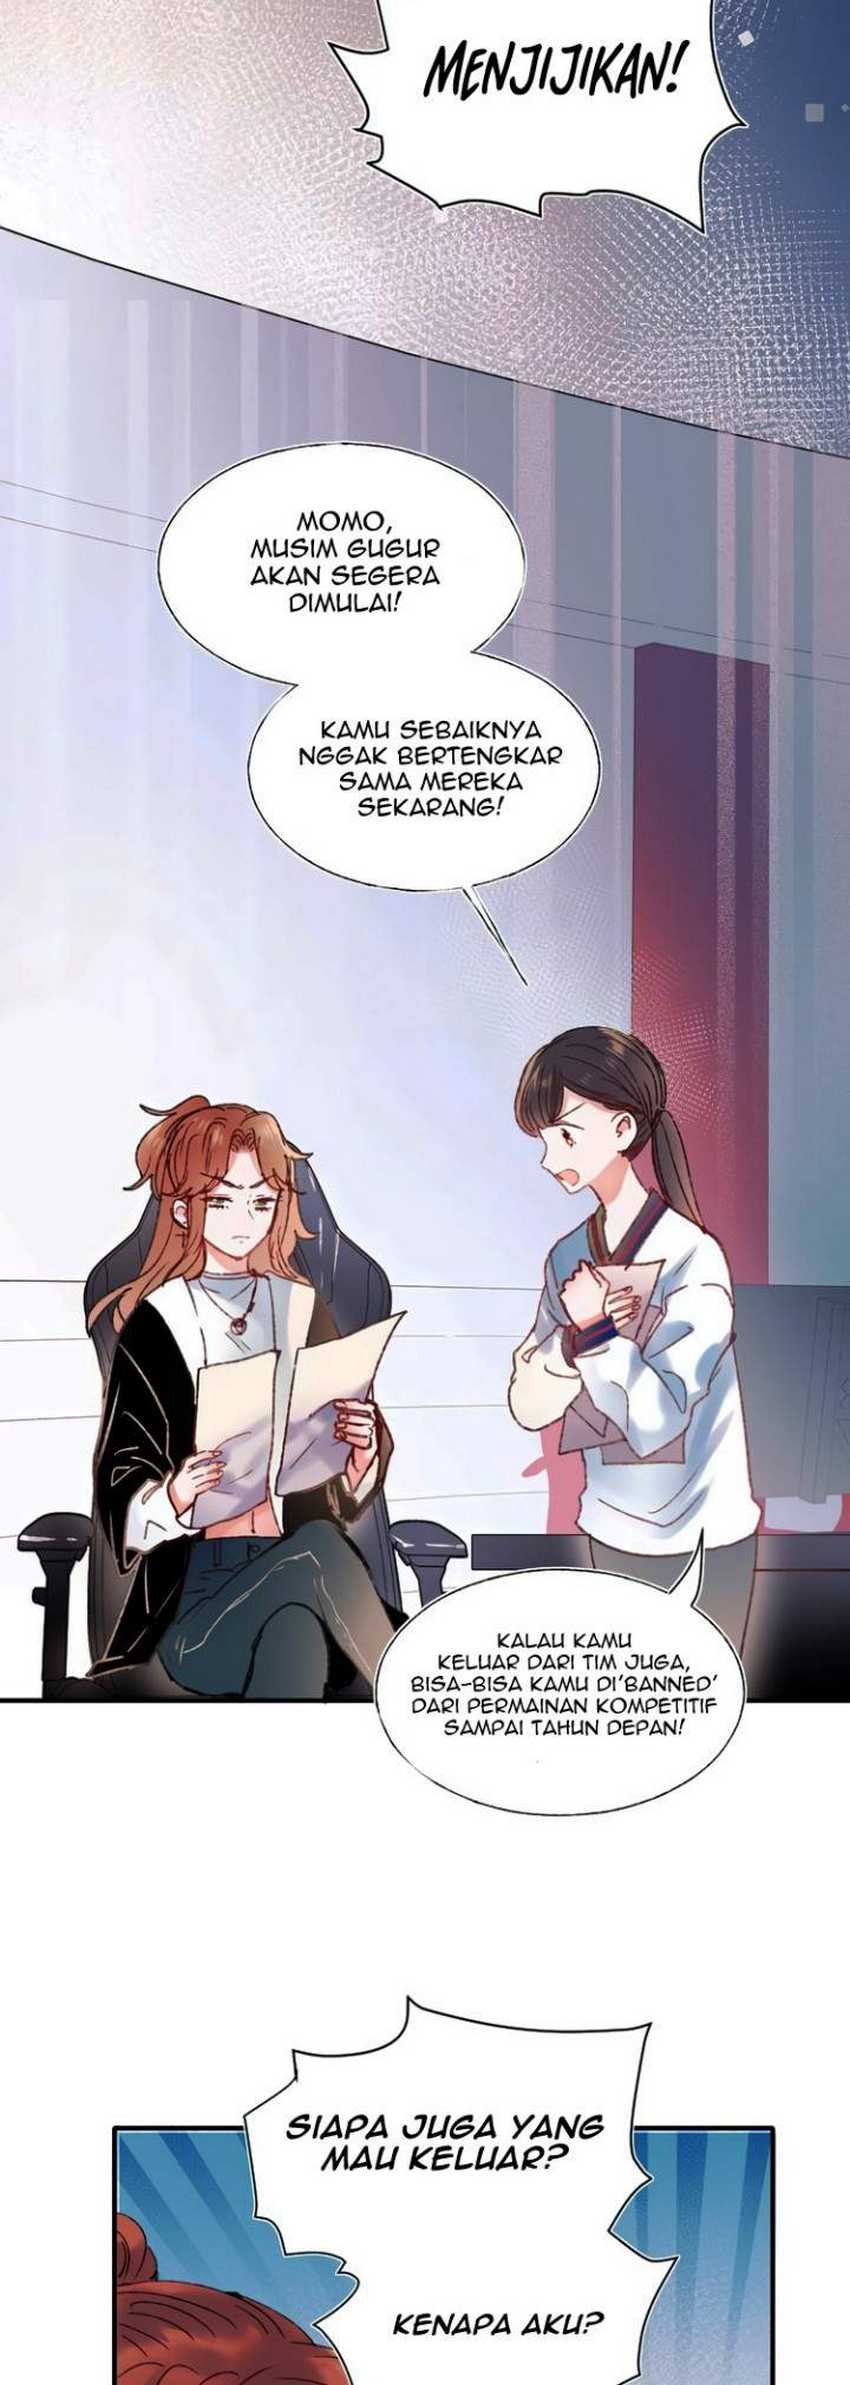 To be a Winner Chapter 42